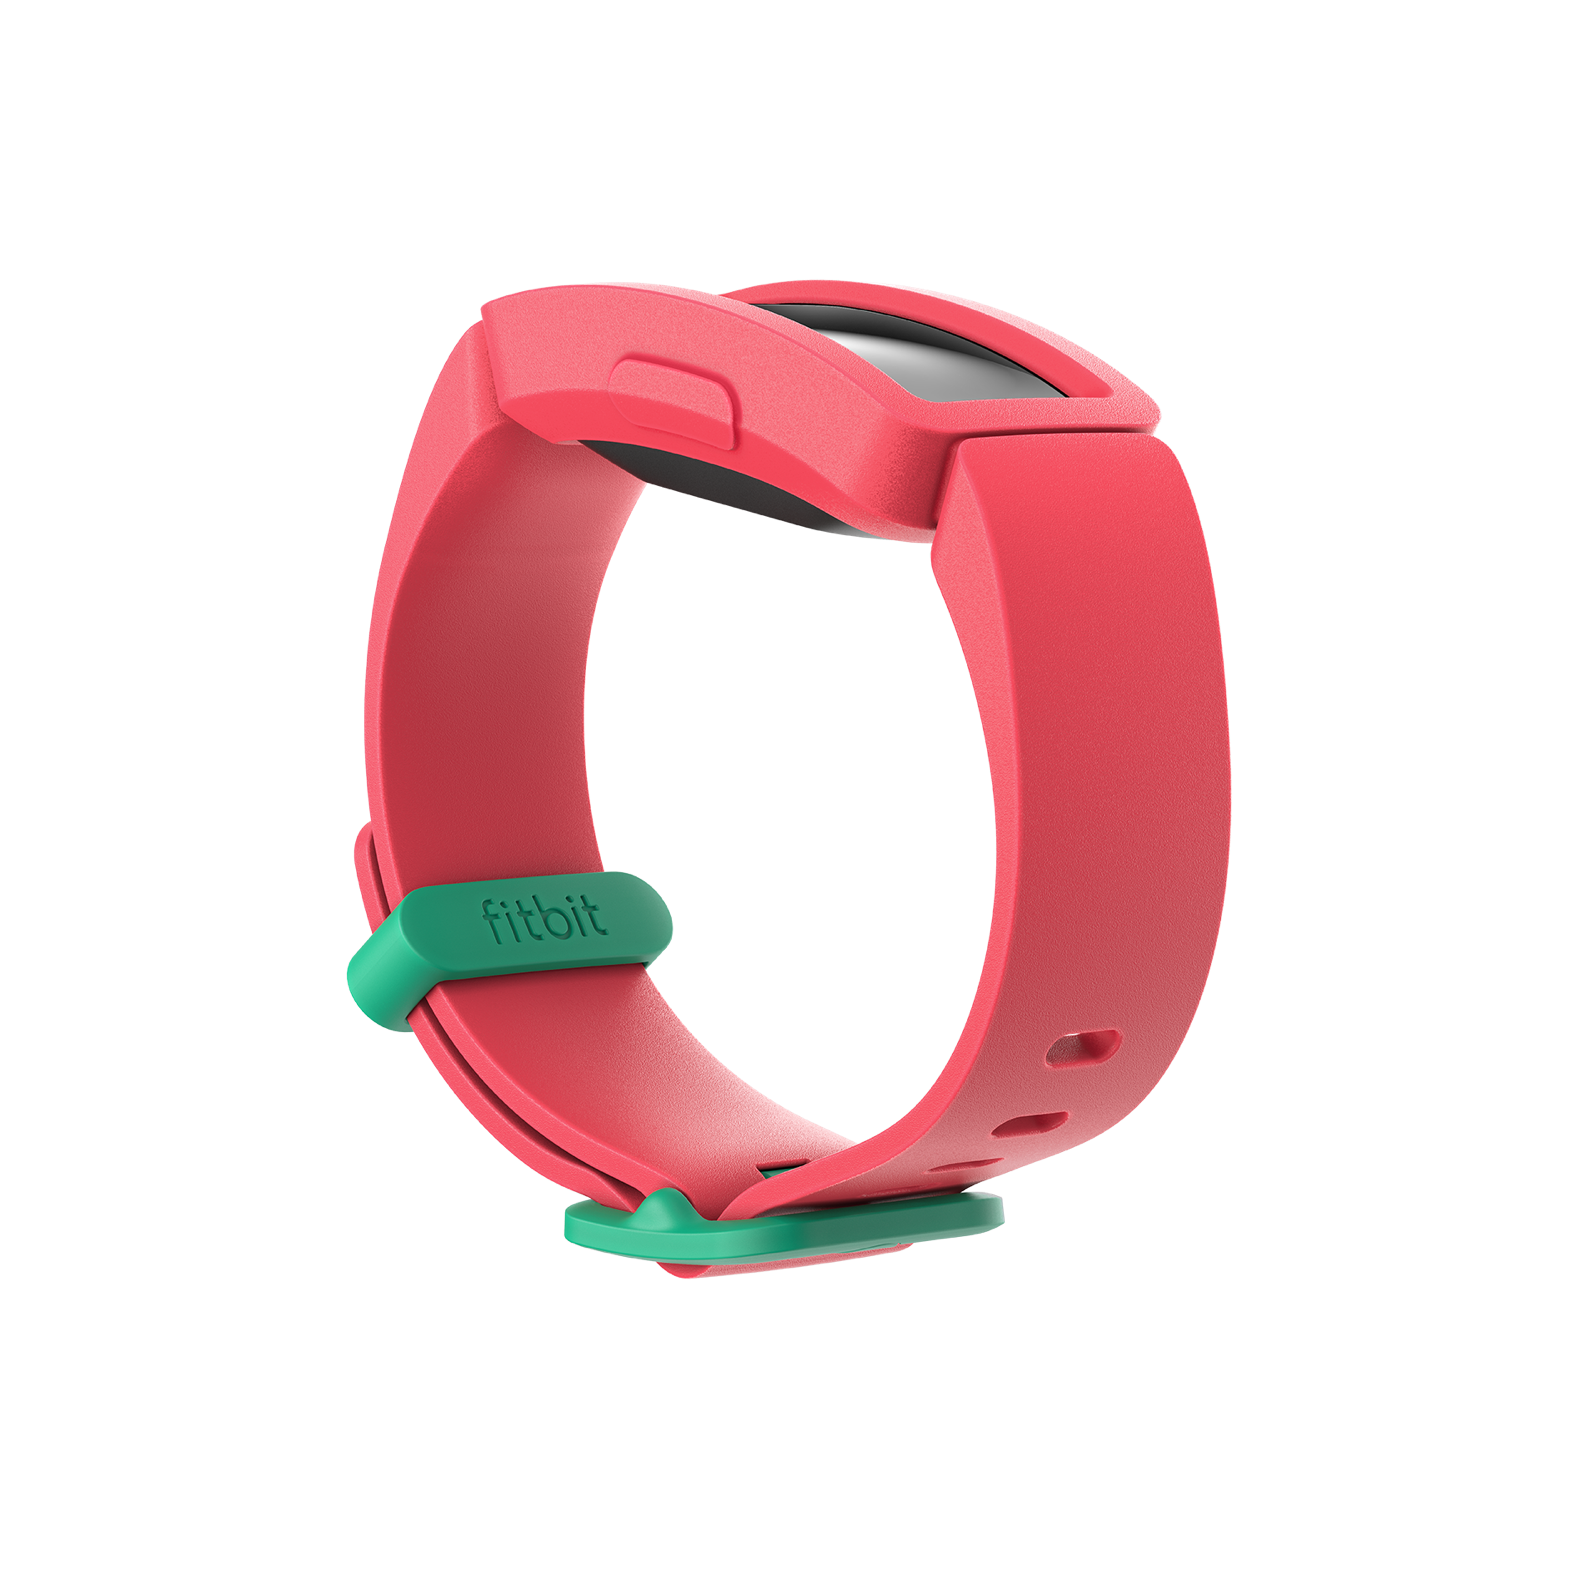 fitbit ace 2 wristbands